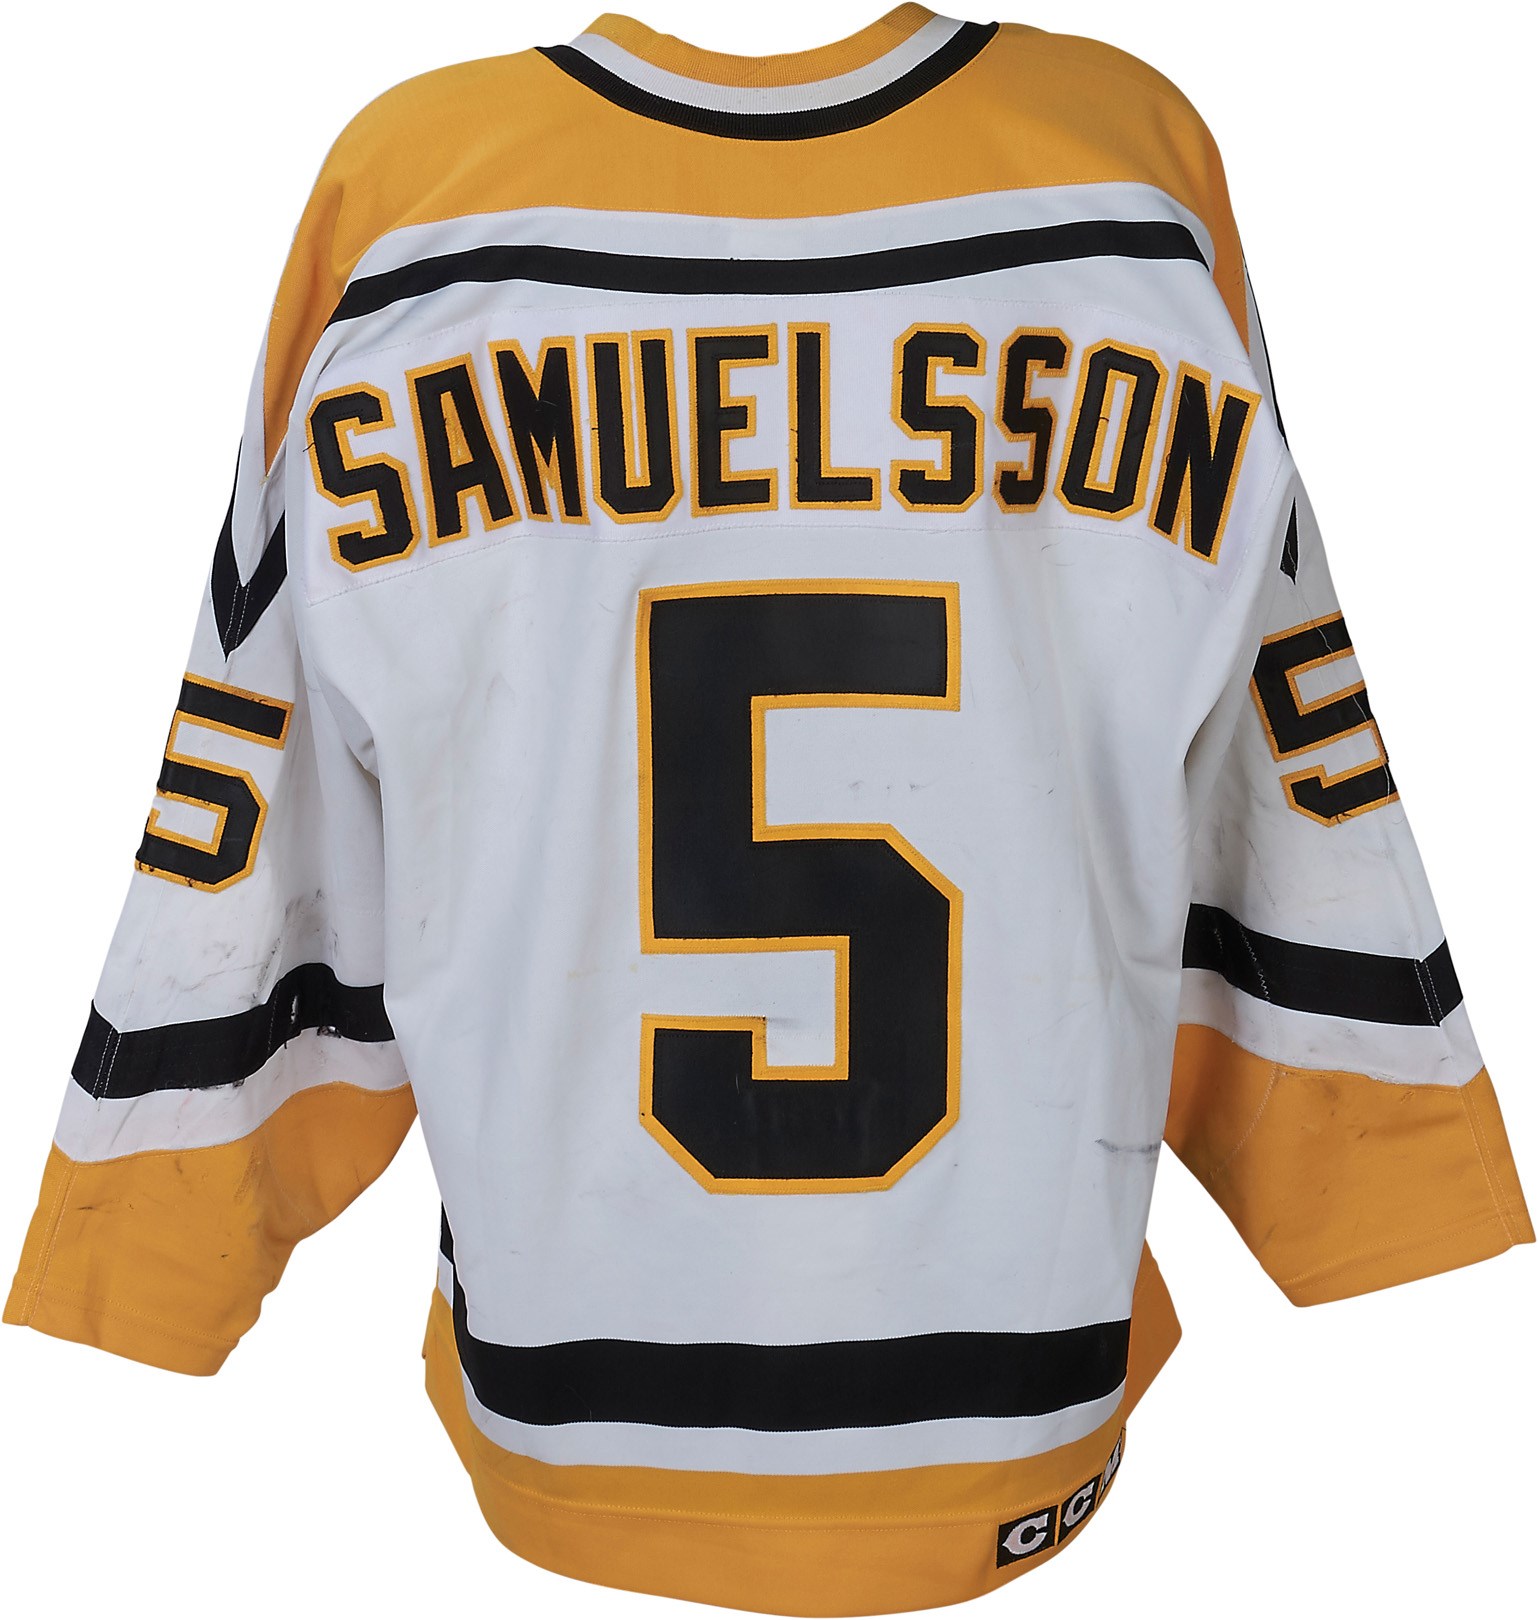 - 1993-94 Ulf Samuelsson Pittsburgh Penguins Game Used Jersey